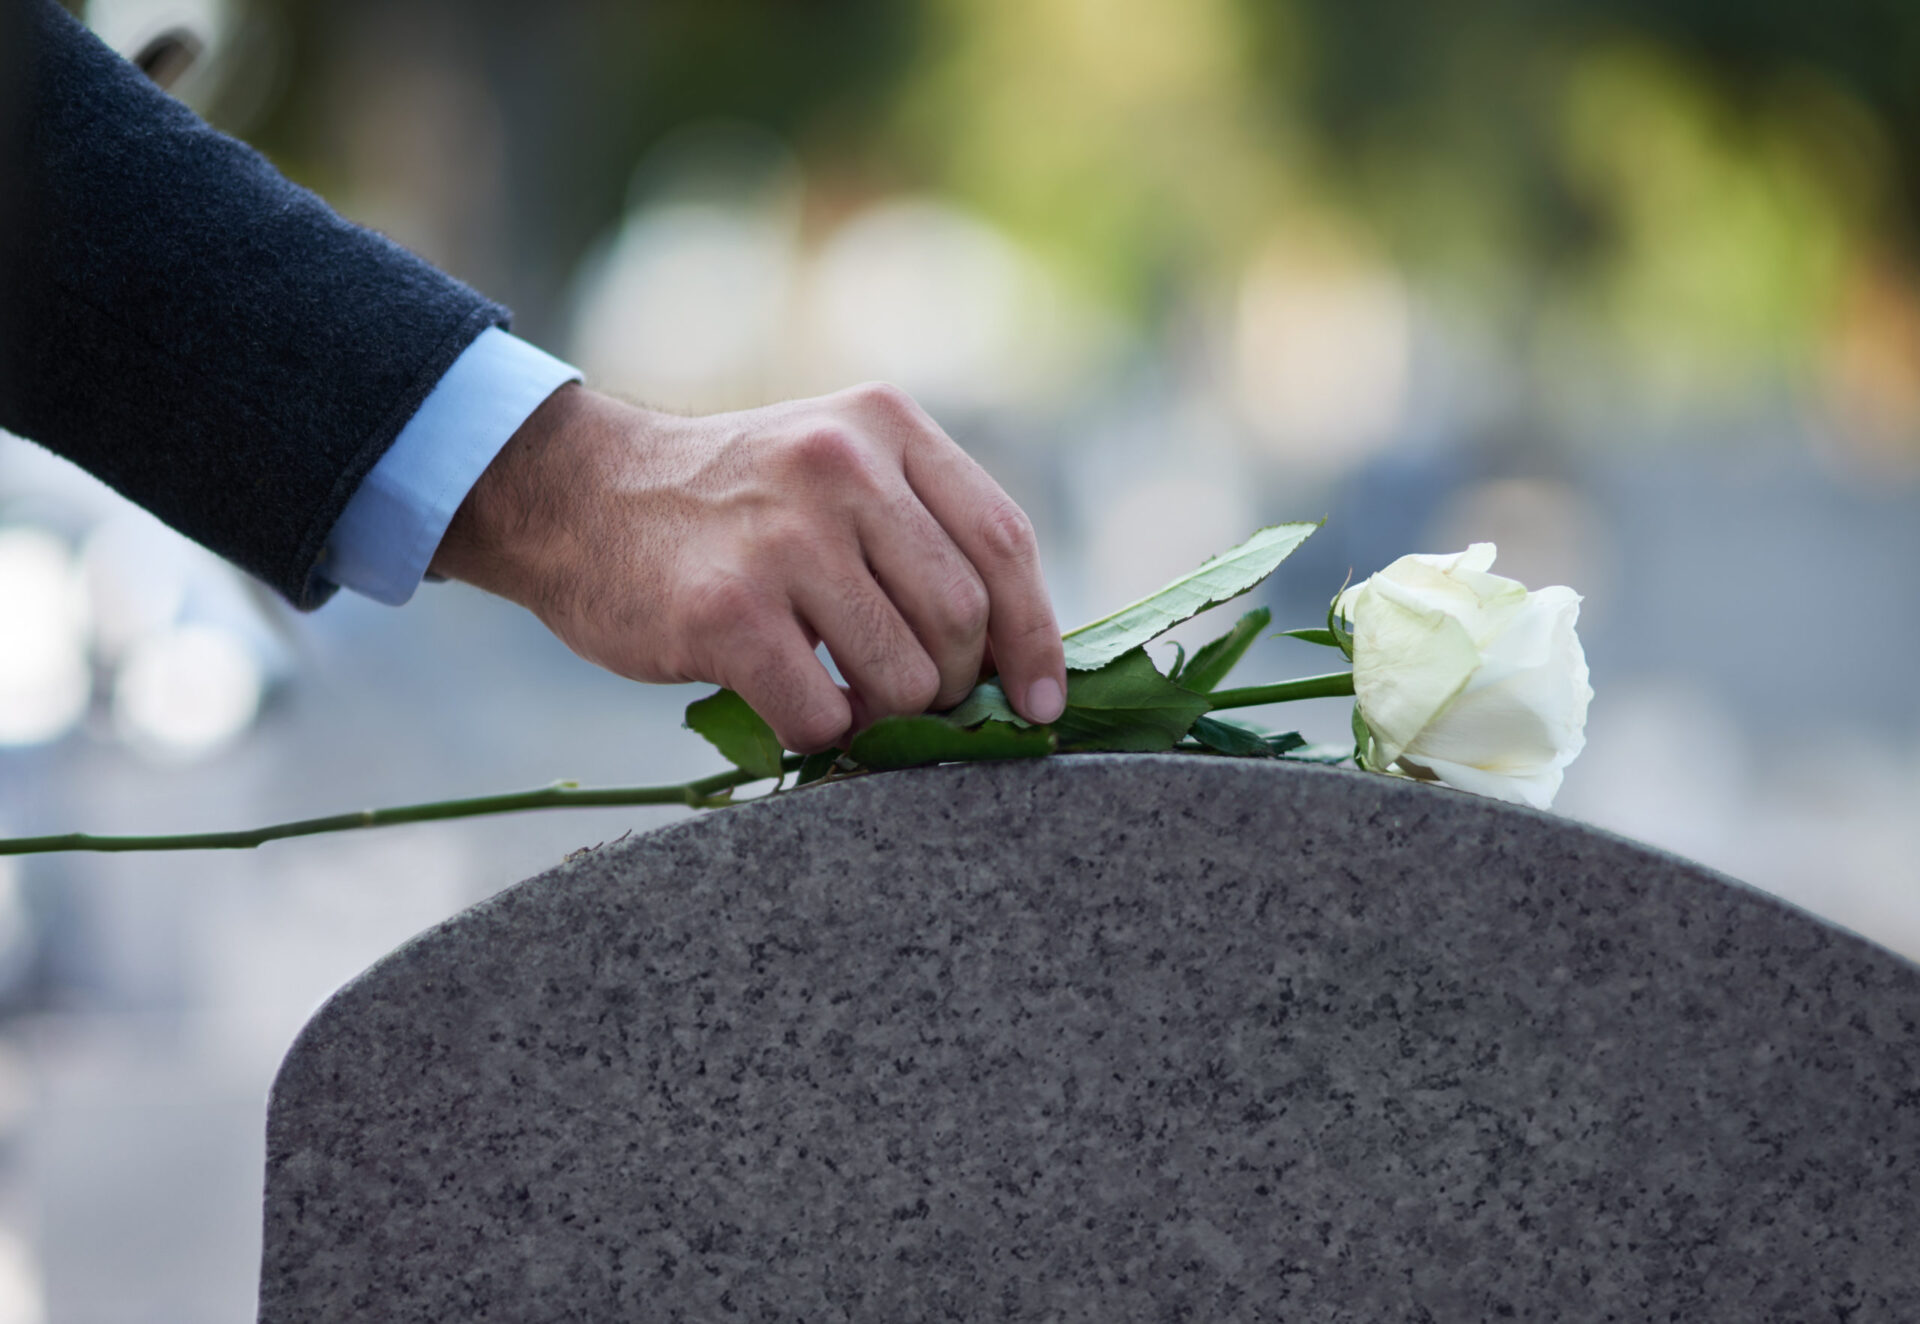 Do You Qualify to Sue for Wrongful Death?